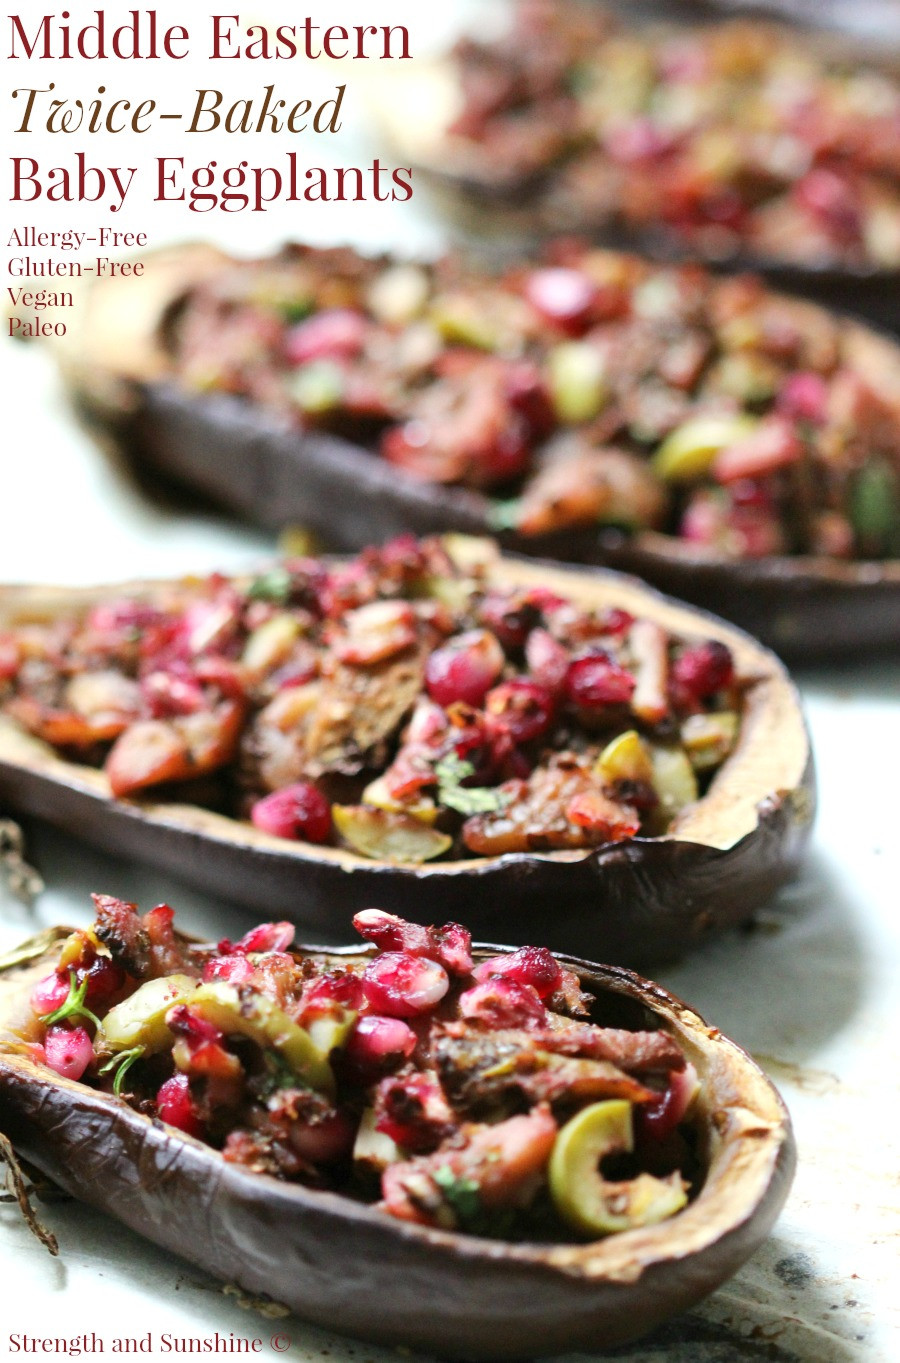 Vegan Middle Eastern Recipes
 Middle Eastern Twice Baked Baby Eggplants